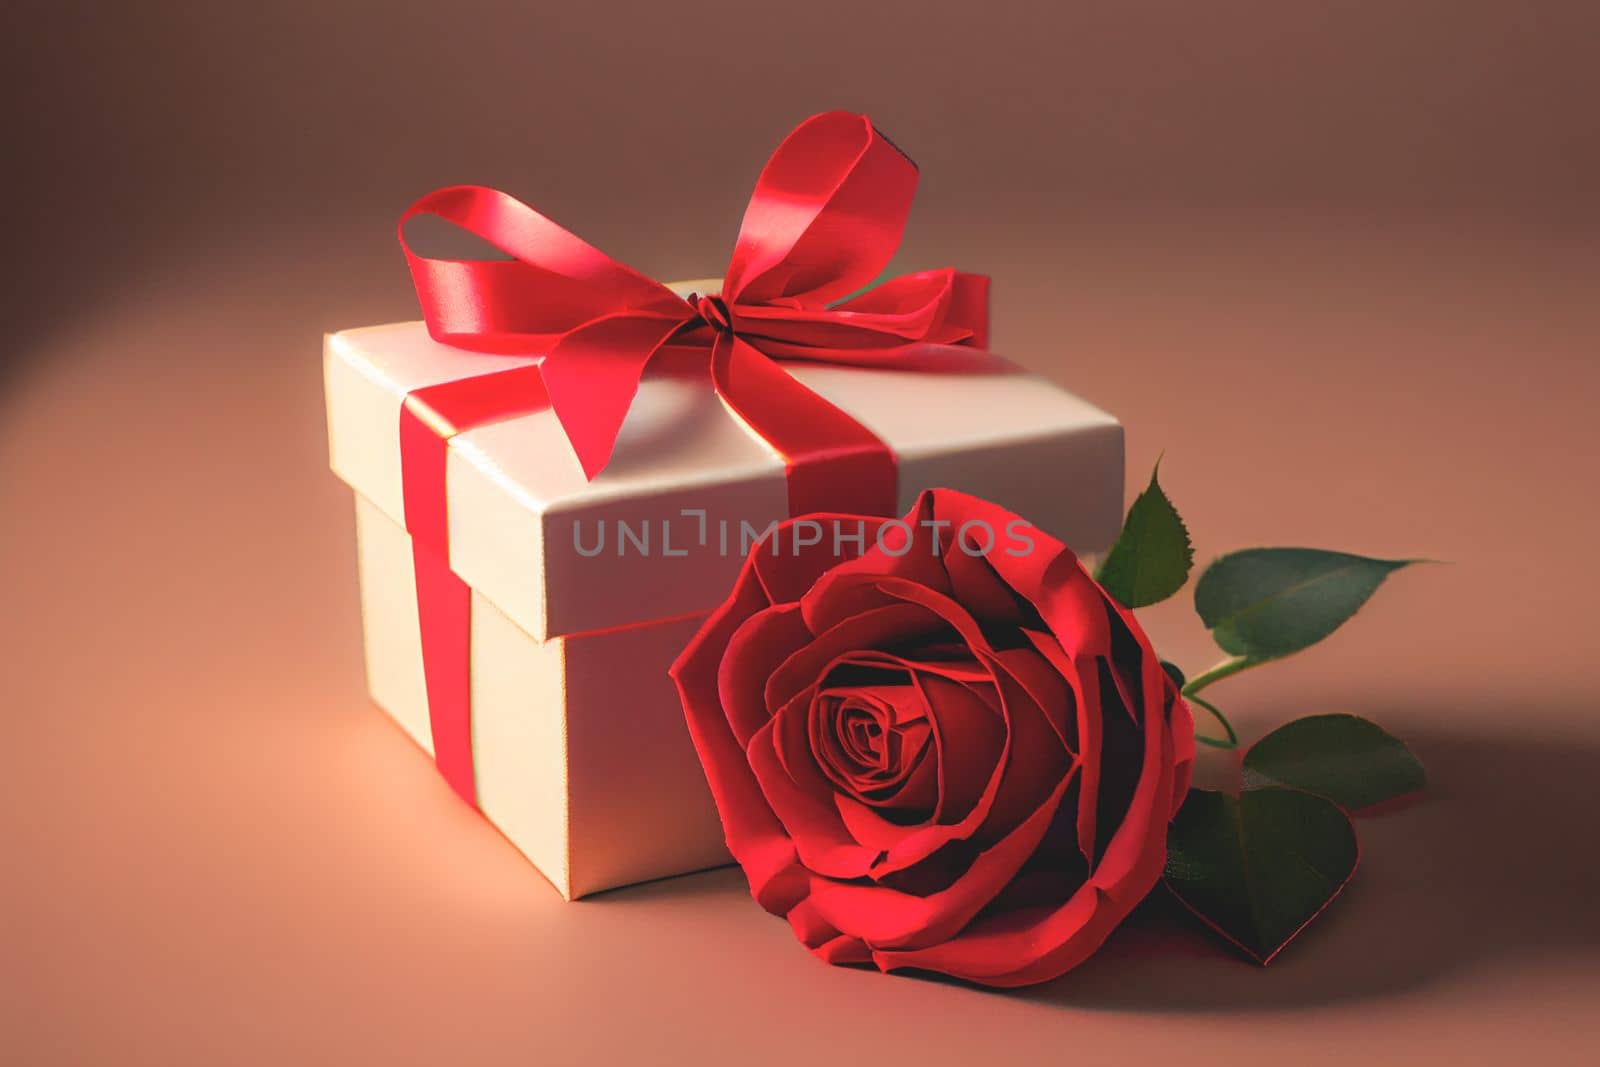 Present wrapped in red bow with red rose on red background by FokasuArt